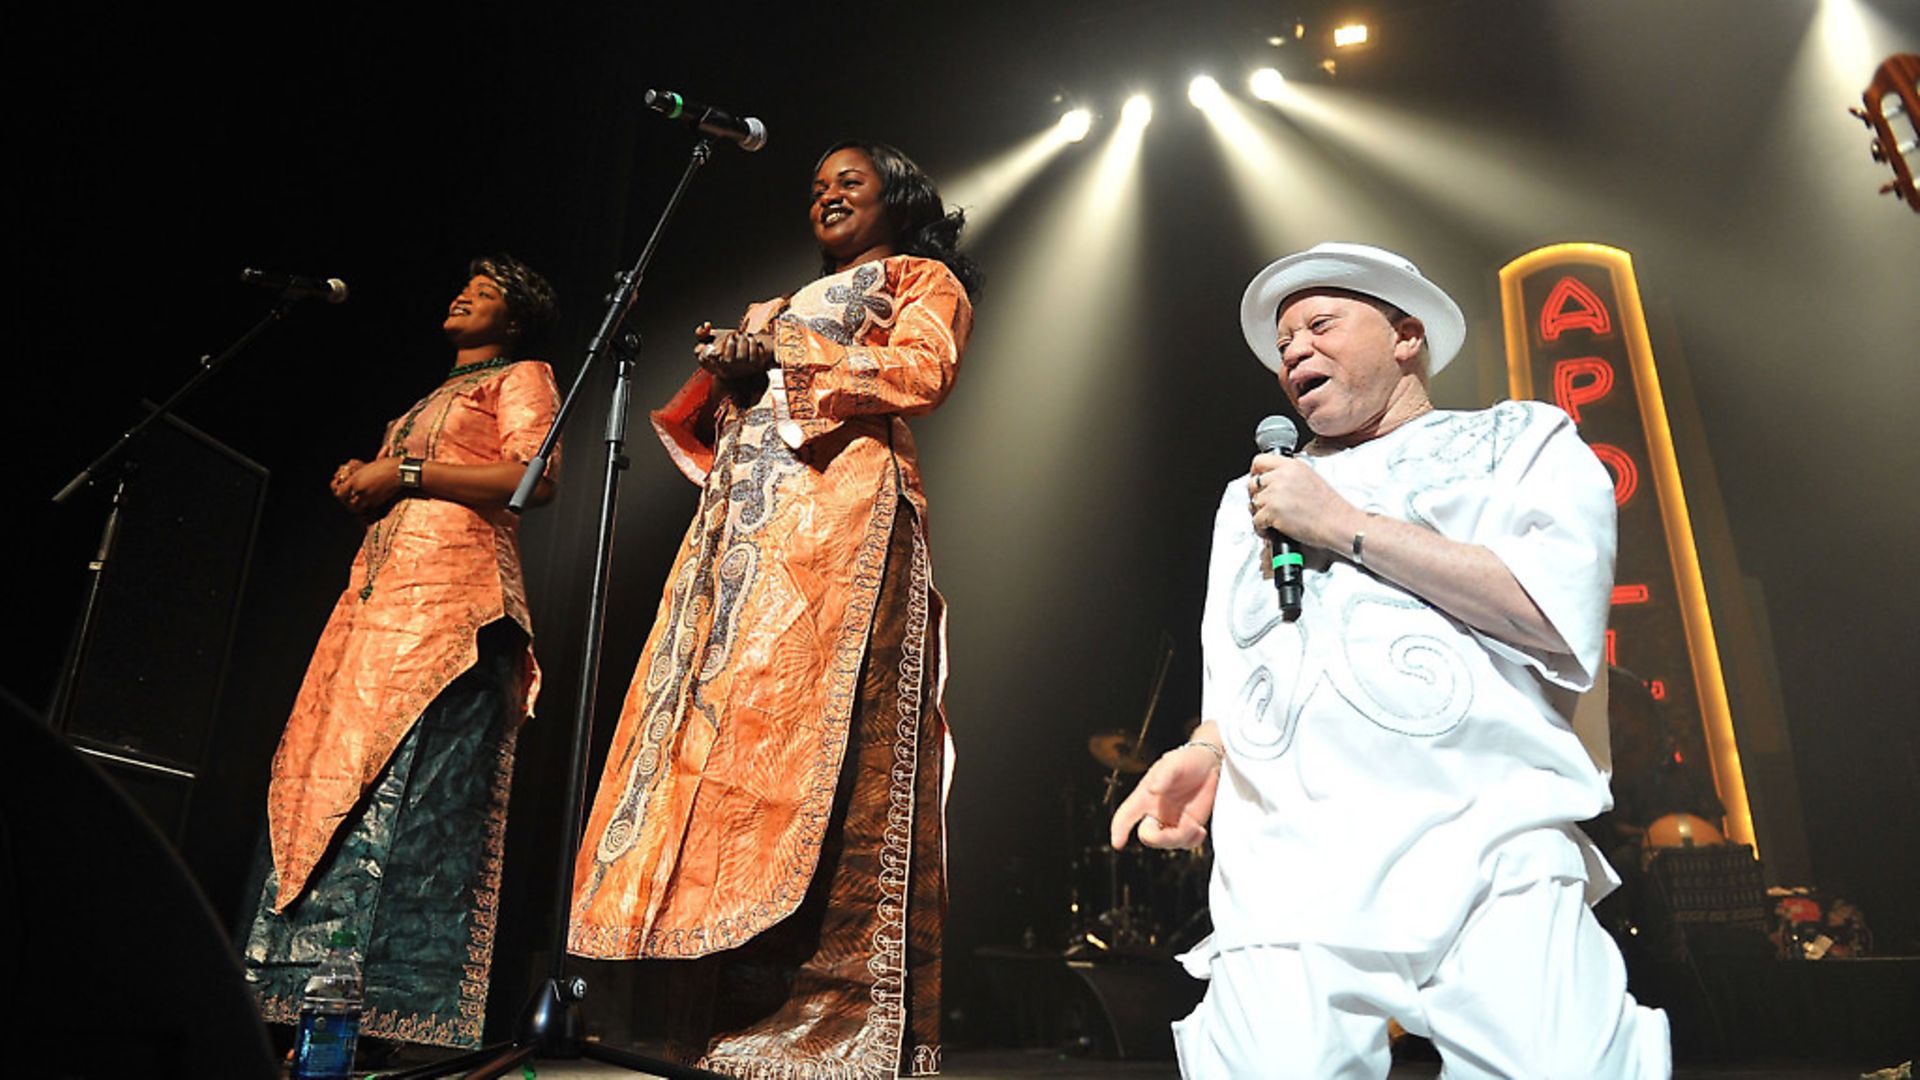 NSalif Keita performs at The Apollo Theater on April 9, 2011 in New York City.  (Photo by Shahar Azran/WireImage) - Credit: WireImage